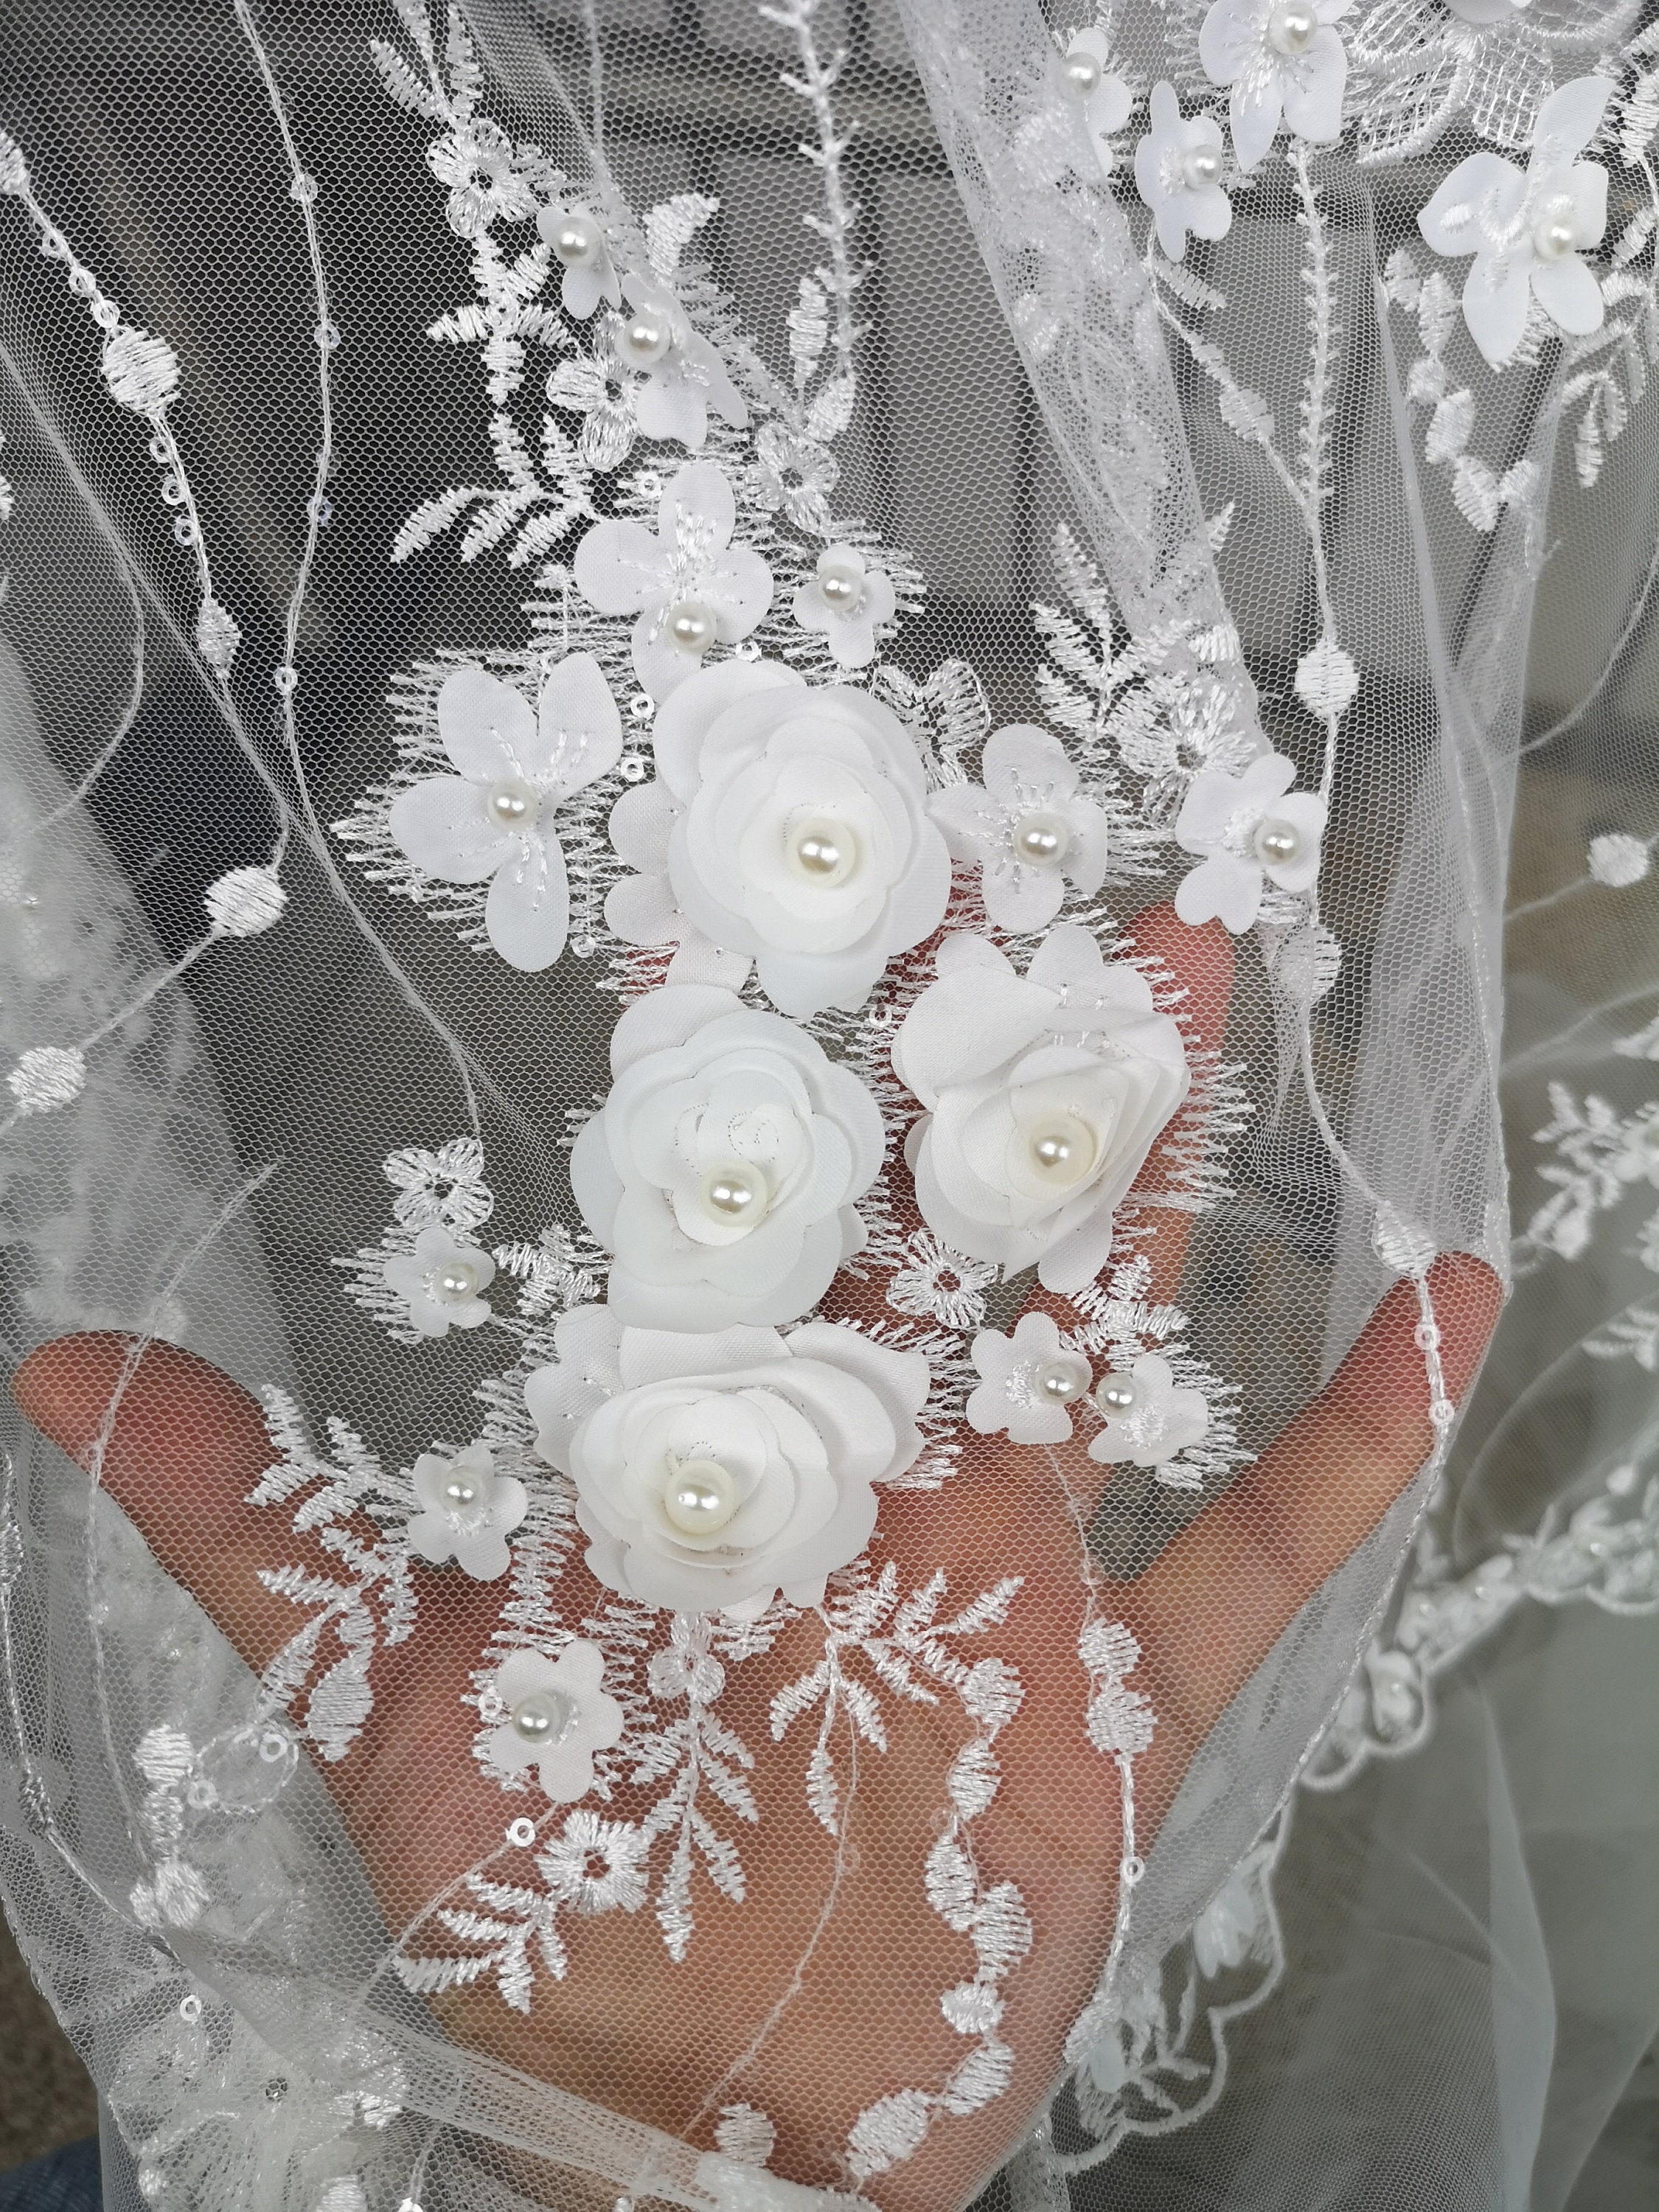 1 Yard 3D Flower Beaded Lace Fabric,white Pearl Wedding Dress Lace,off  White Flower Embroidery Bridal Wedding Dress,floral Vintage Lace 